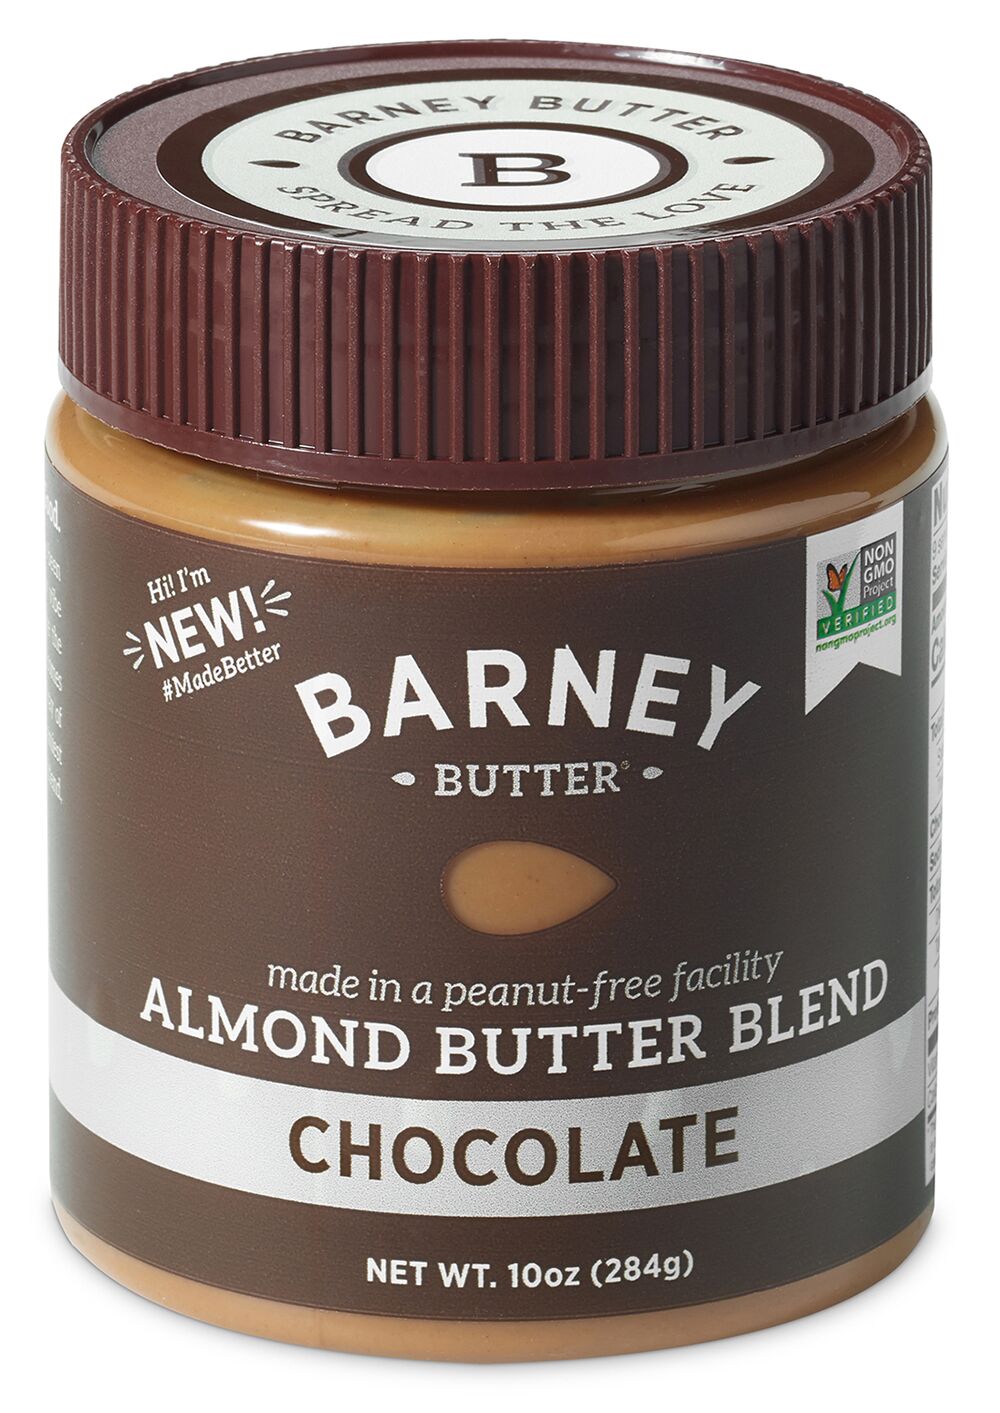 Pb2 Peanut Butter, Powdered  Hy-Vee Aisles Online Grocery Shopping